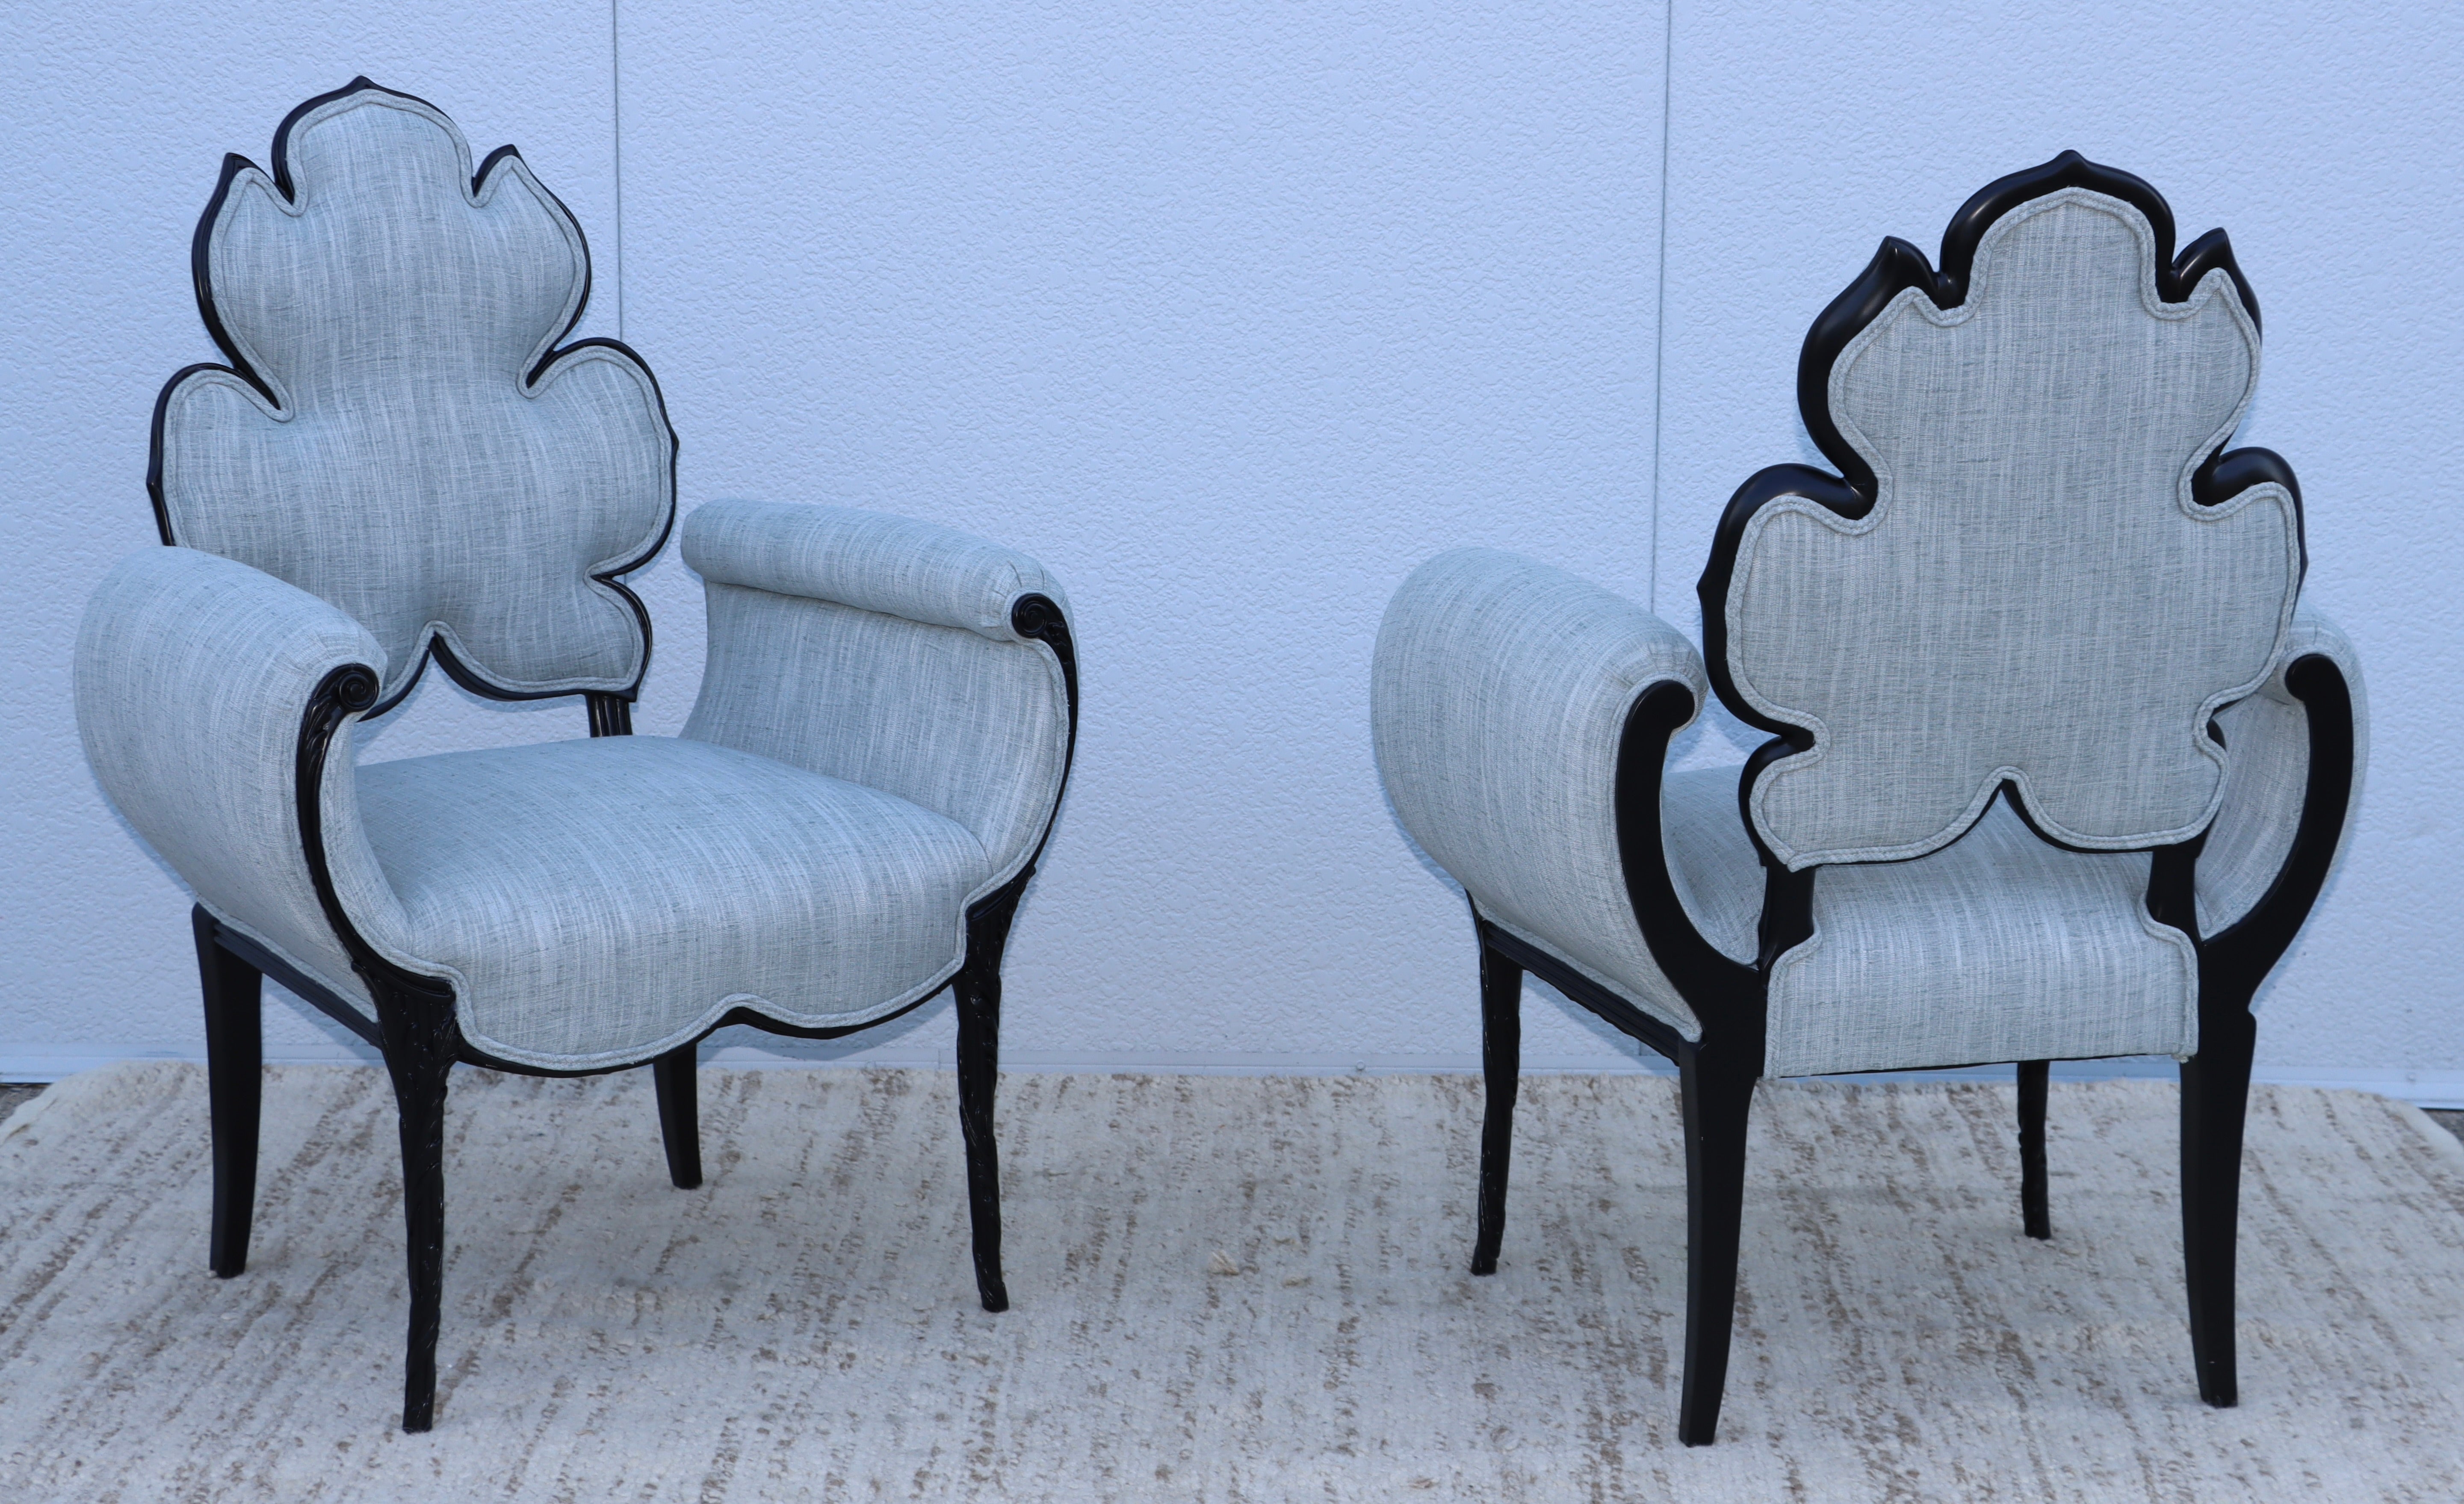 1950's Grosfeld House flower back lounge chairs, fully restored in black lacquer and newly re-upholstered in linen blend Donghia fabric, with minor wear and patina due to age and use.